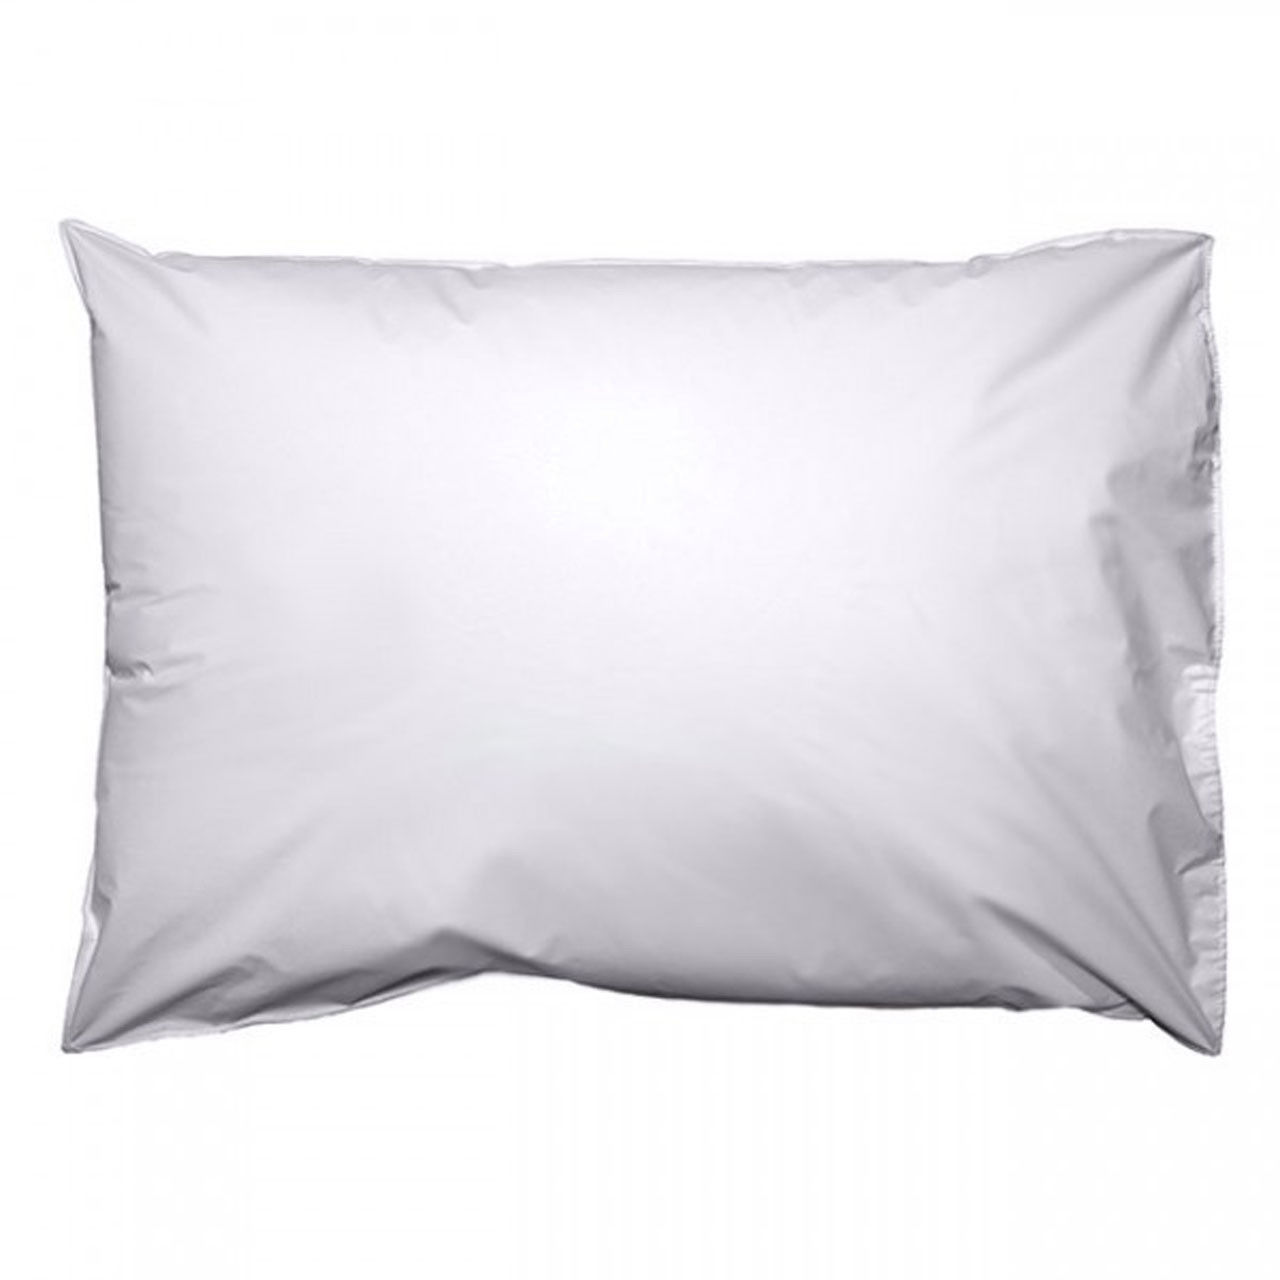 Can you get waterproof pillow cases?